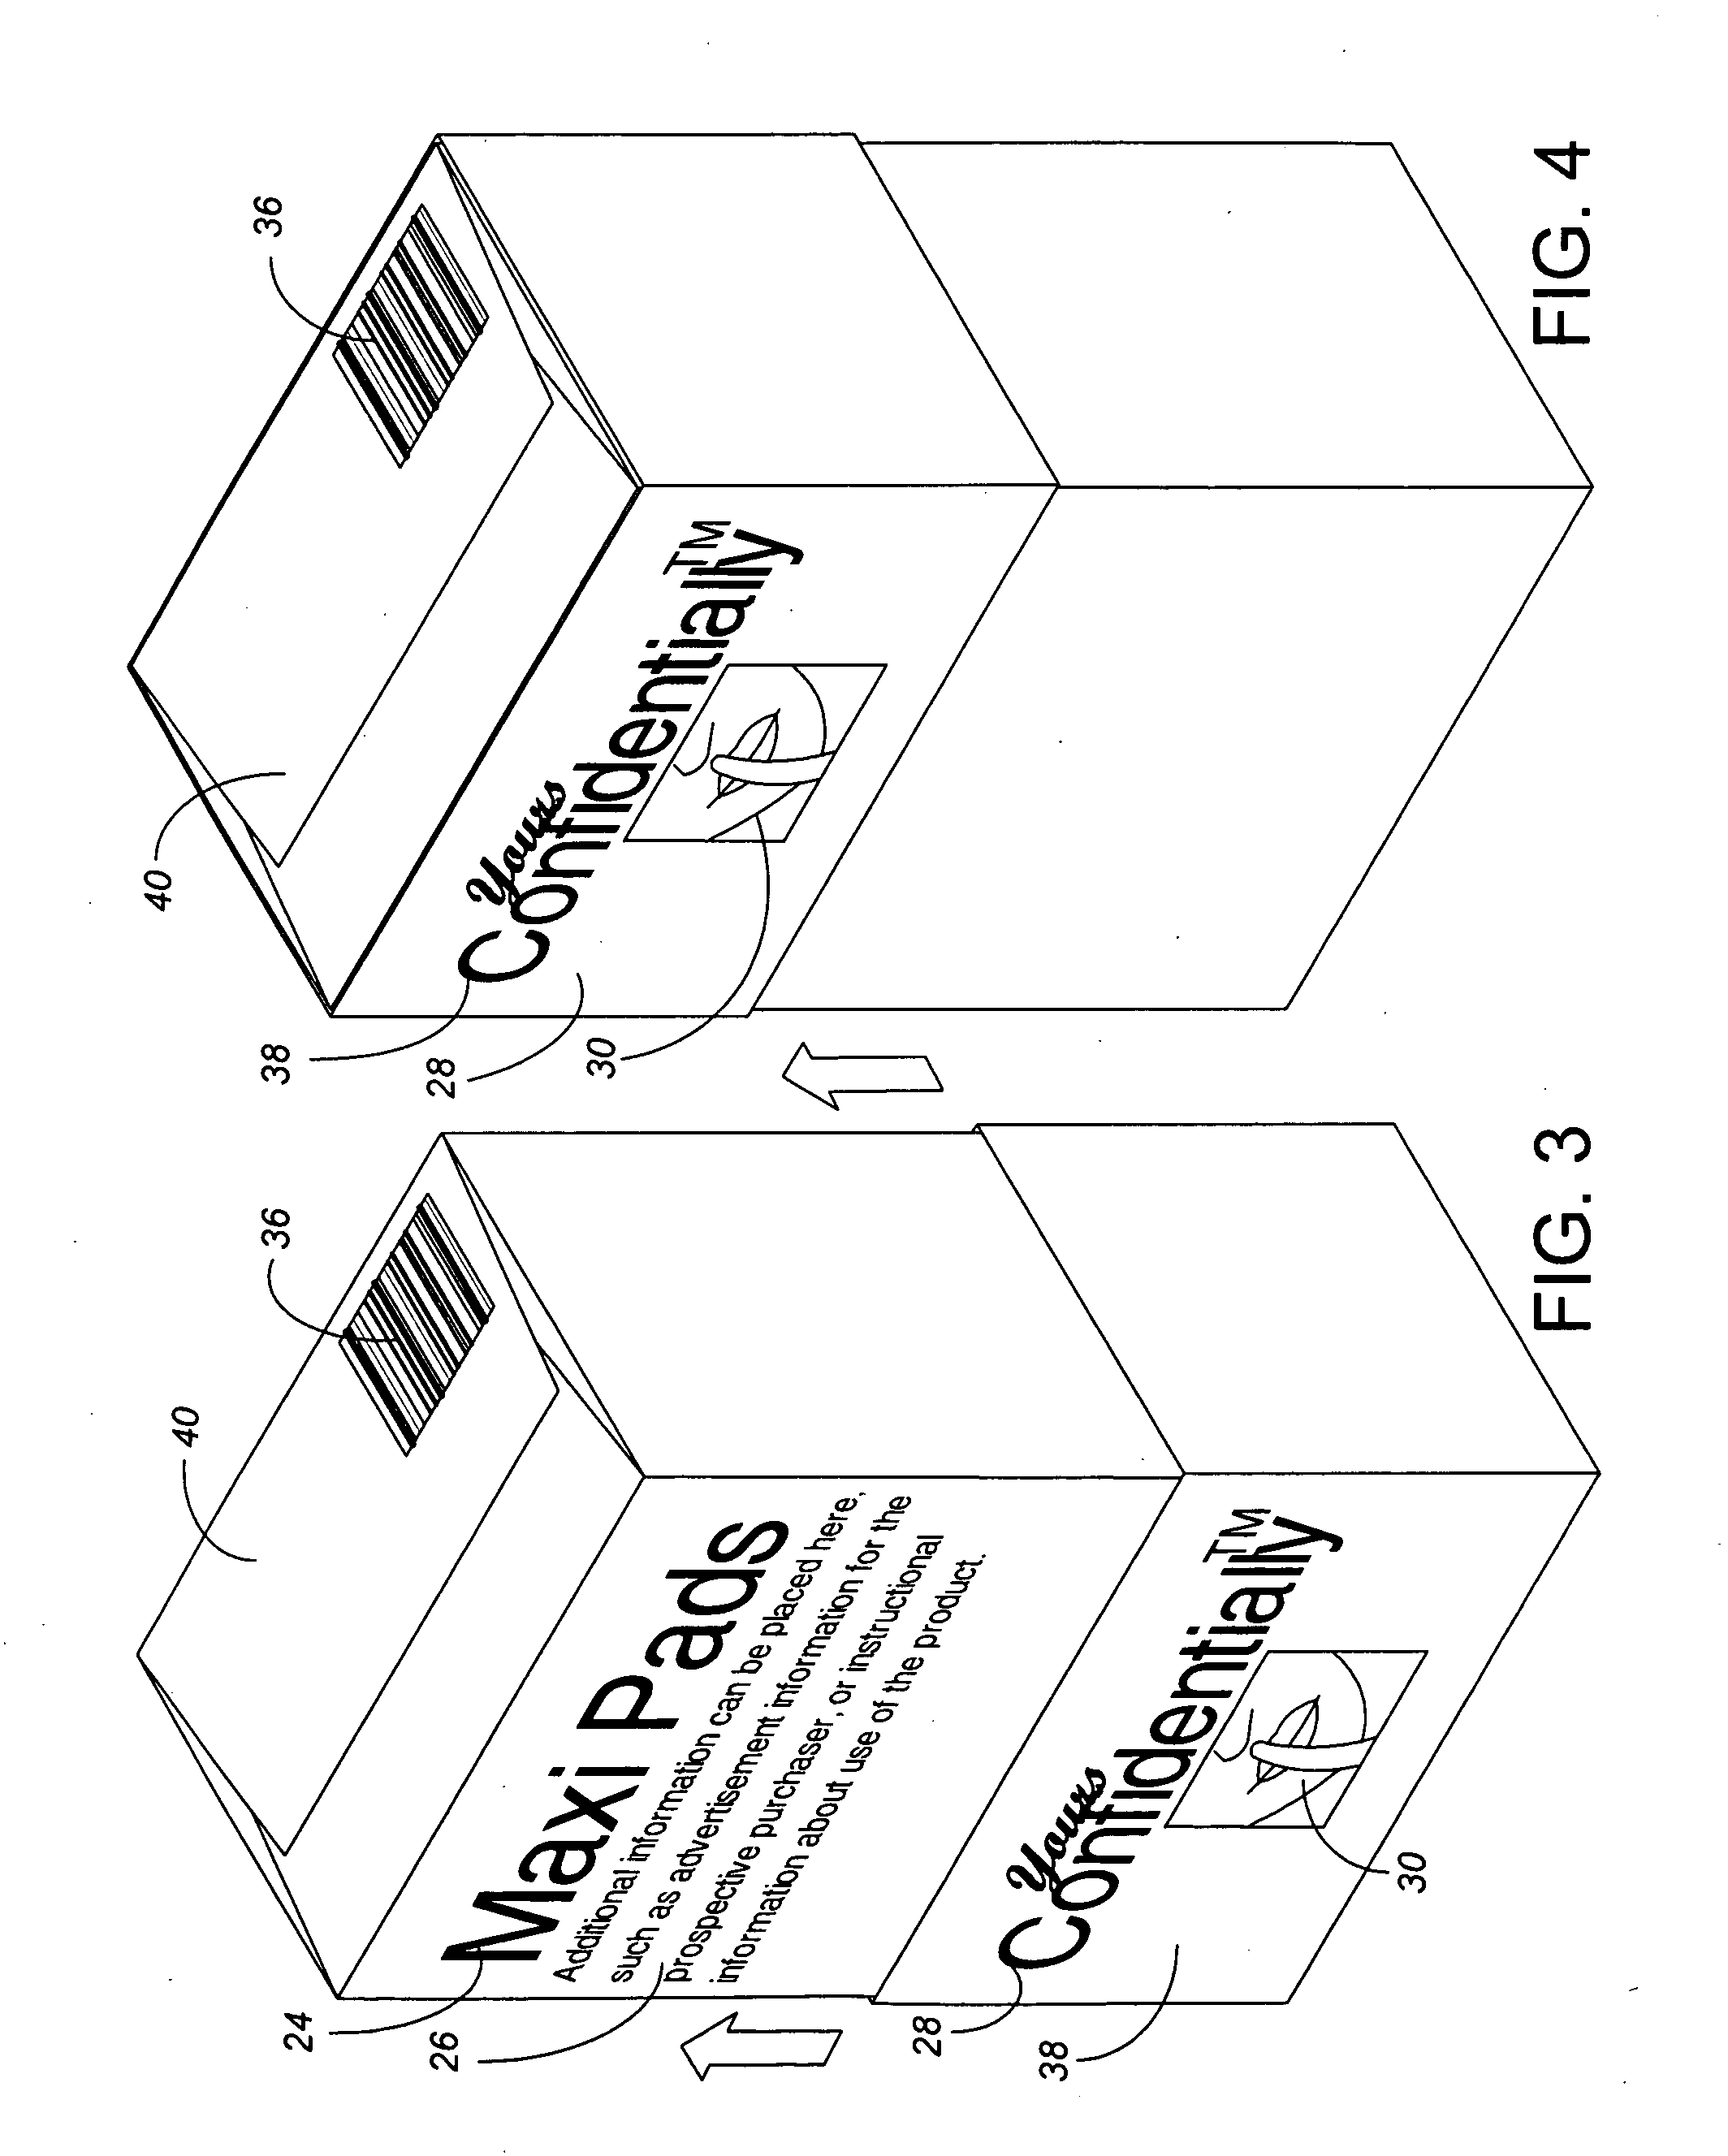 Confidentiality Packaging System